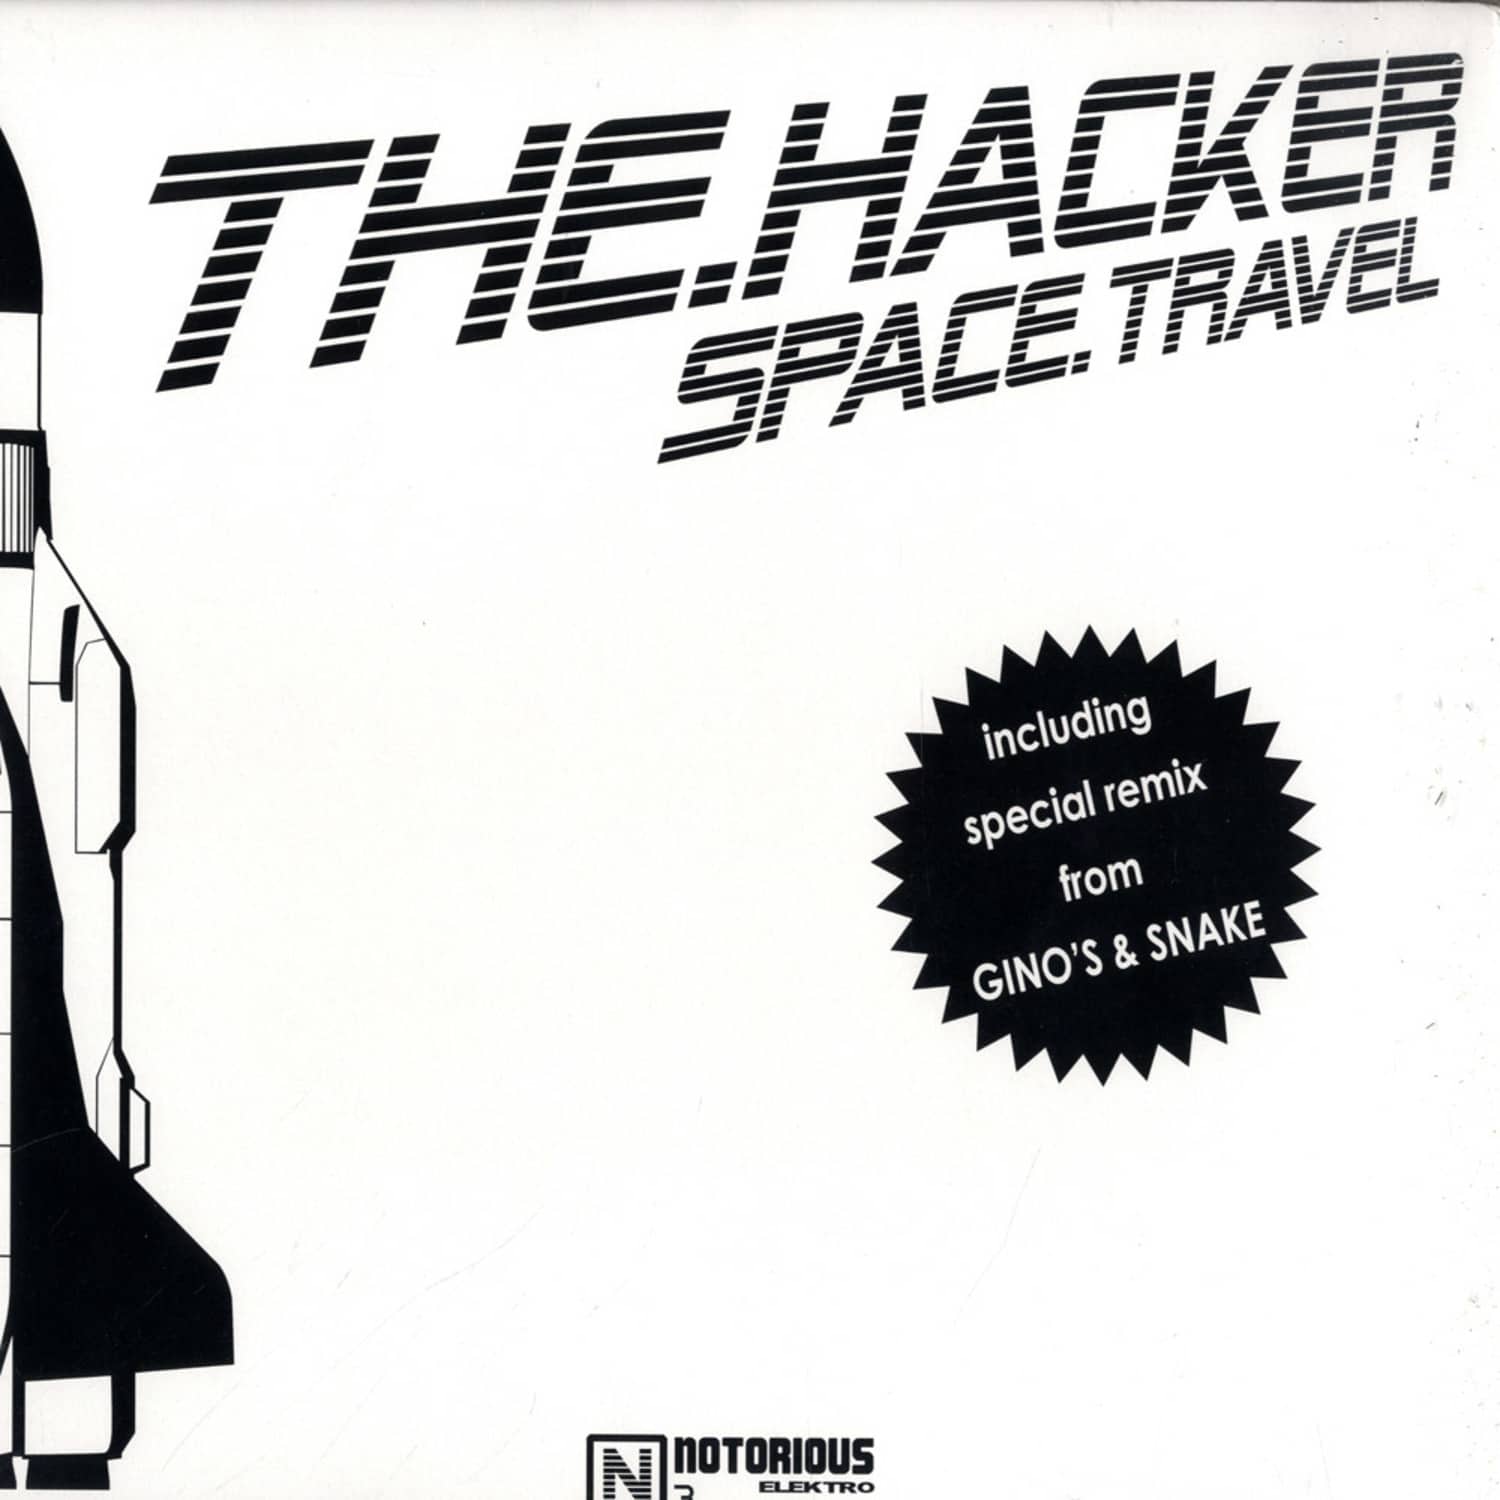 The Hacker - SPACE TRAVEL